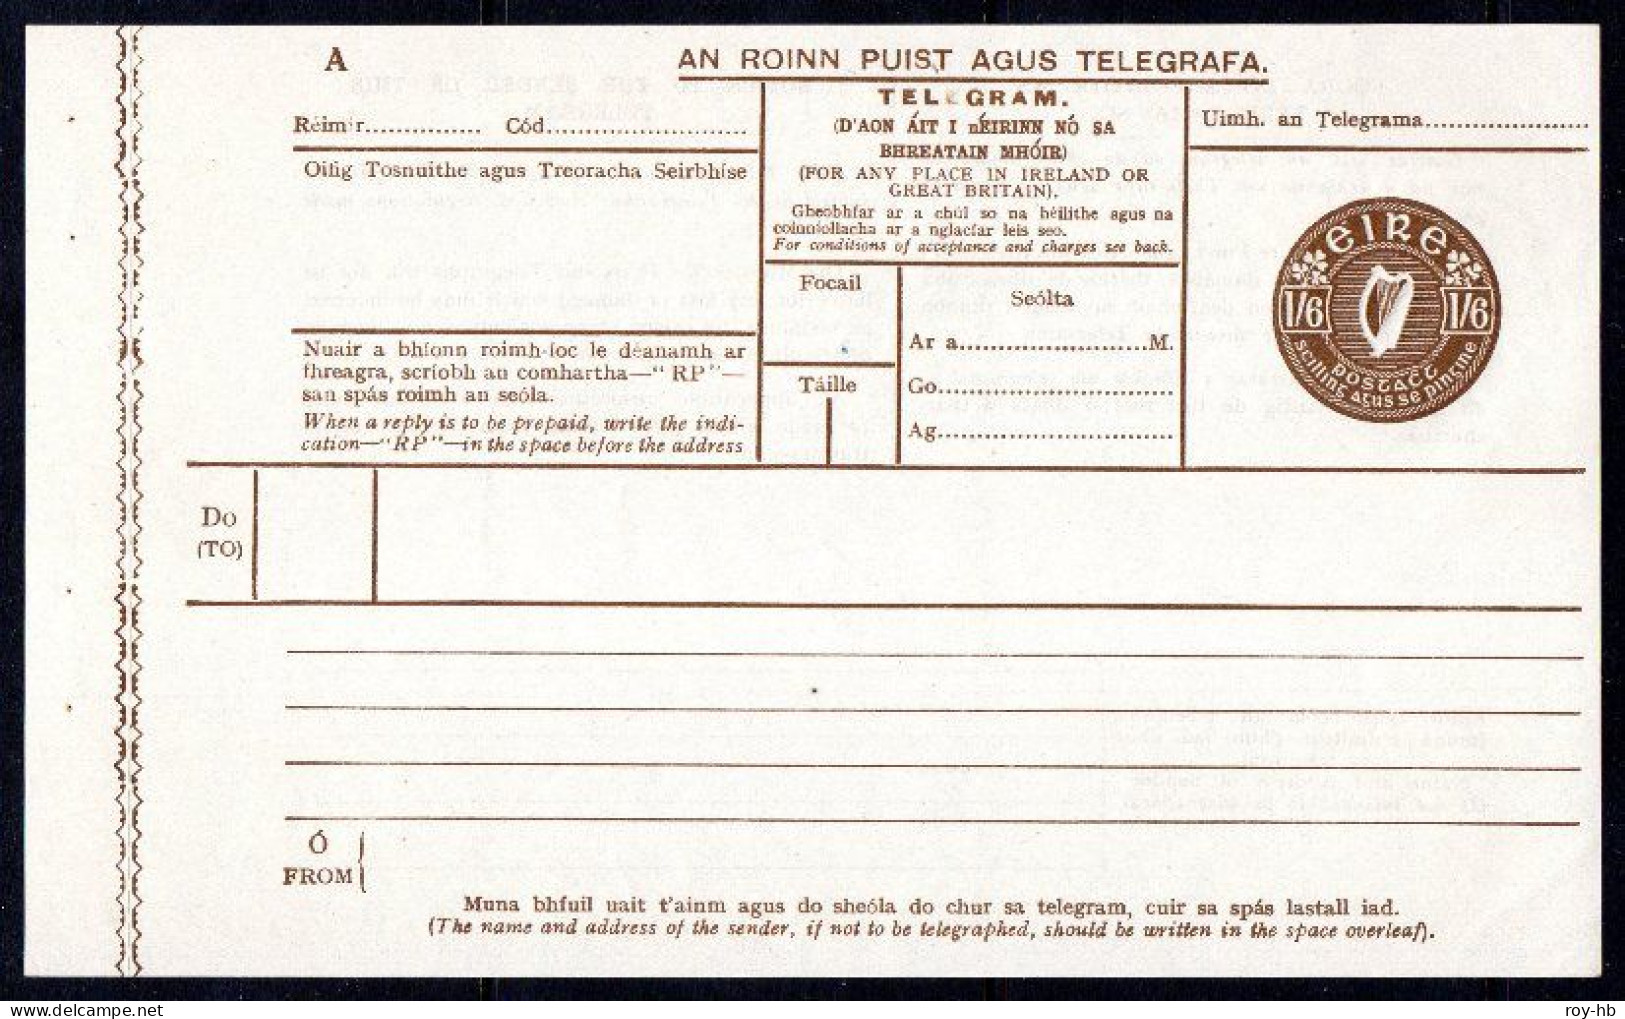 Telegram Form, 1929 1/6 "all Brown" With Original Interleaving Showing A Clear Albino Impression Of The Indicia. - Entiers Postaux